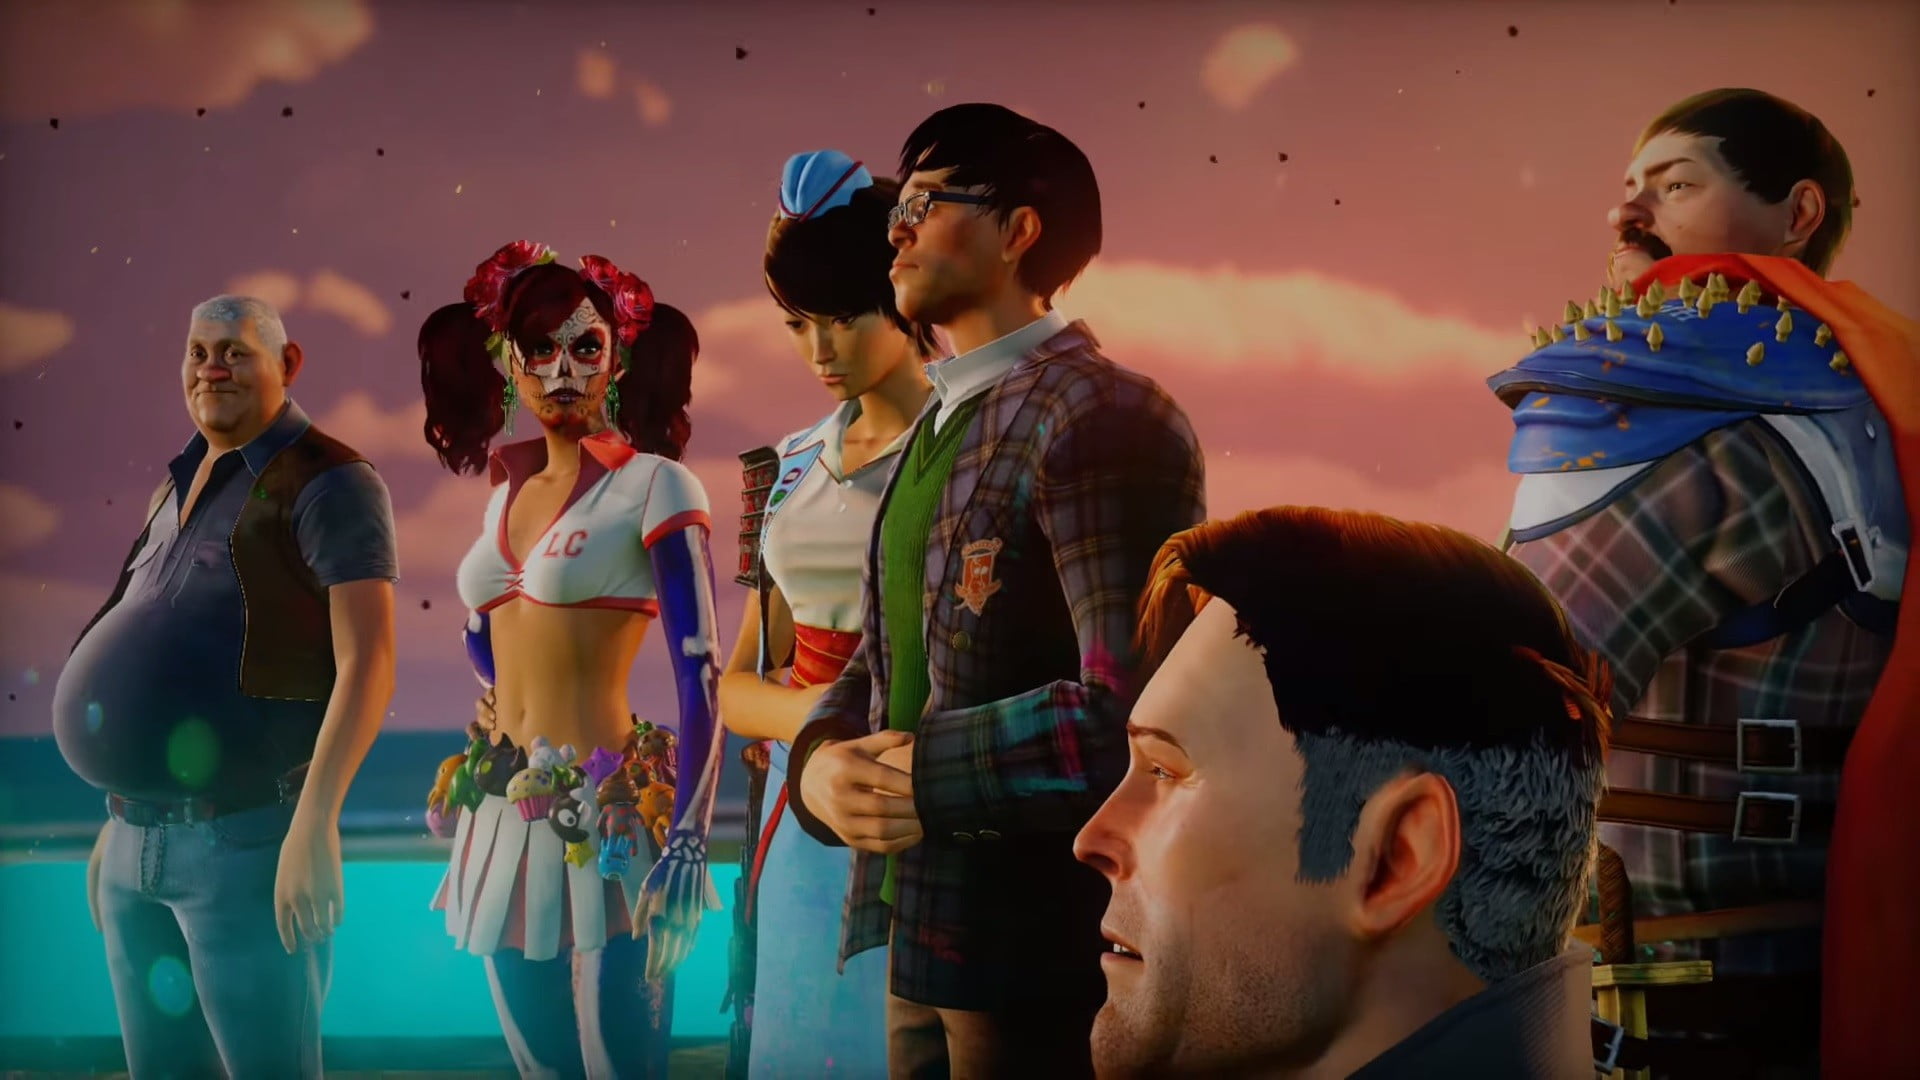 Sunset Overdrive, Xbox One, real people, lifestyles, group of people